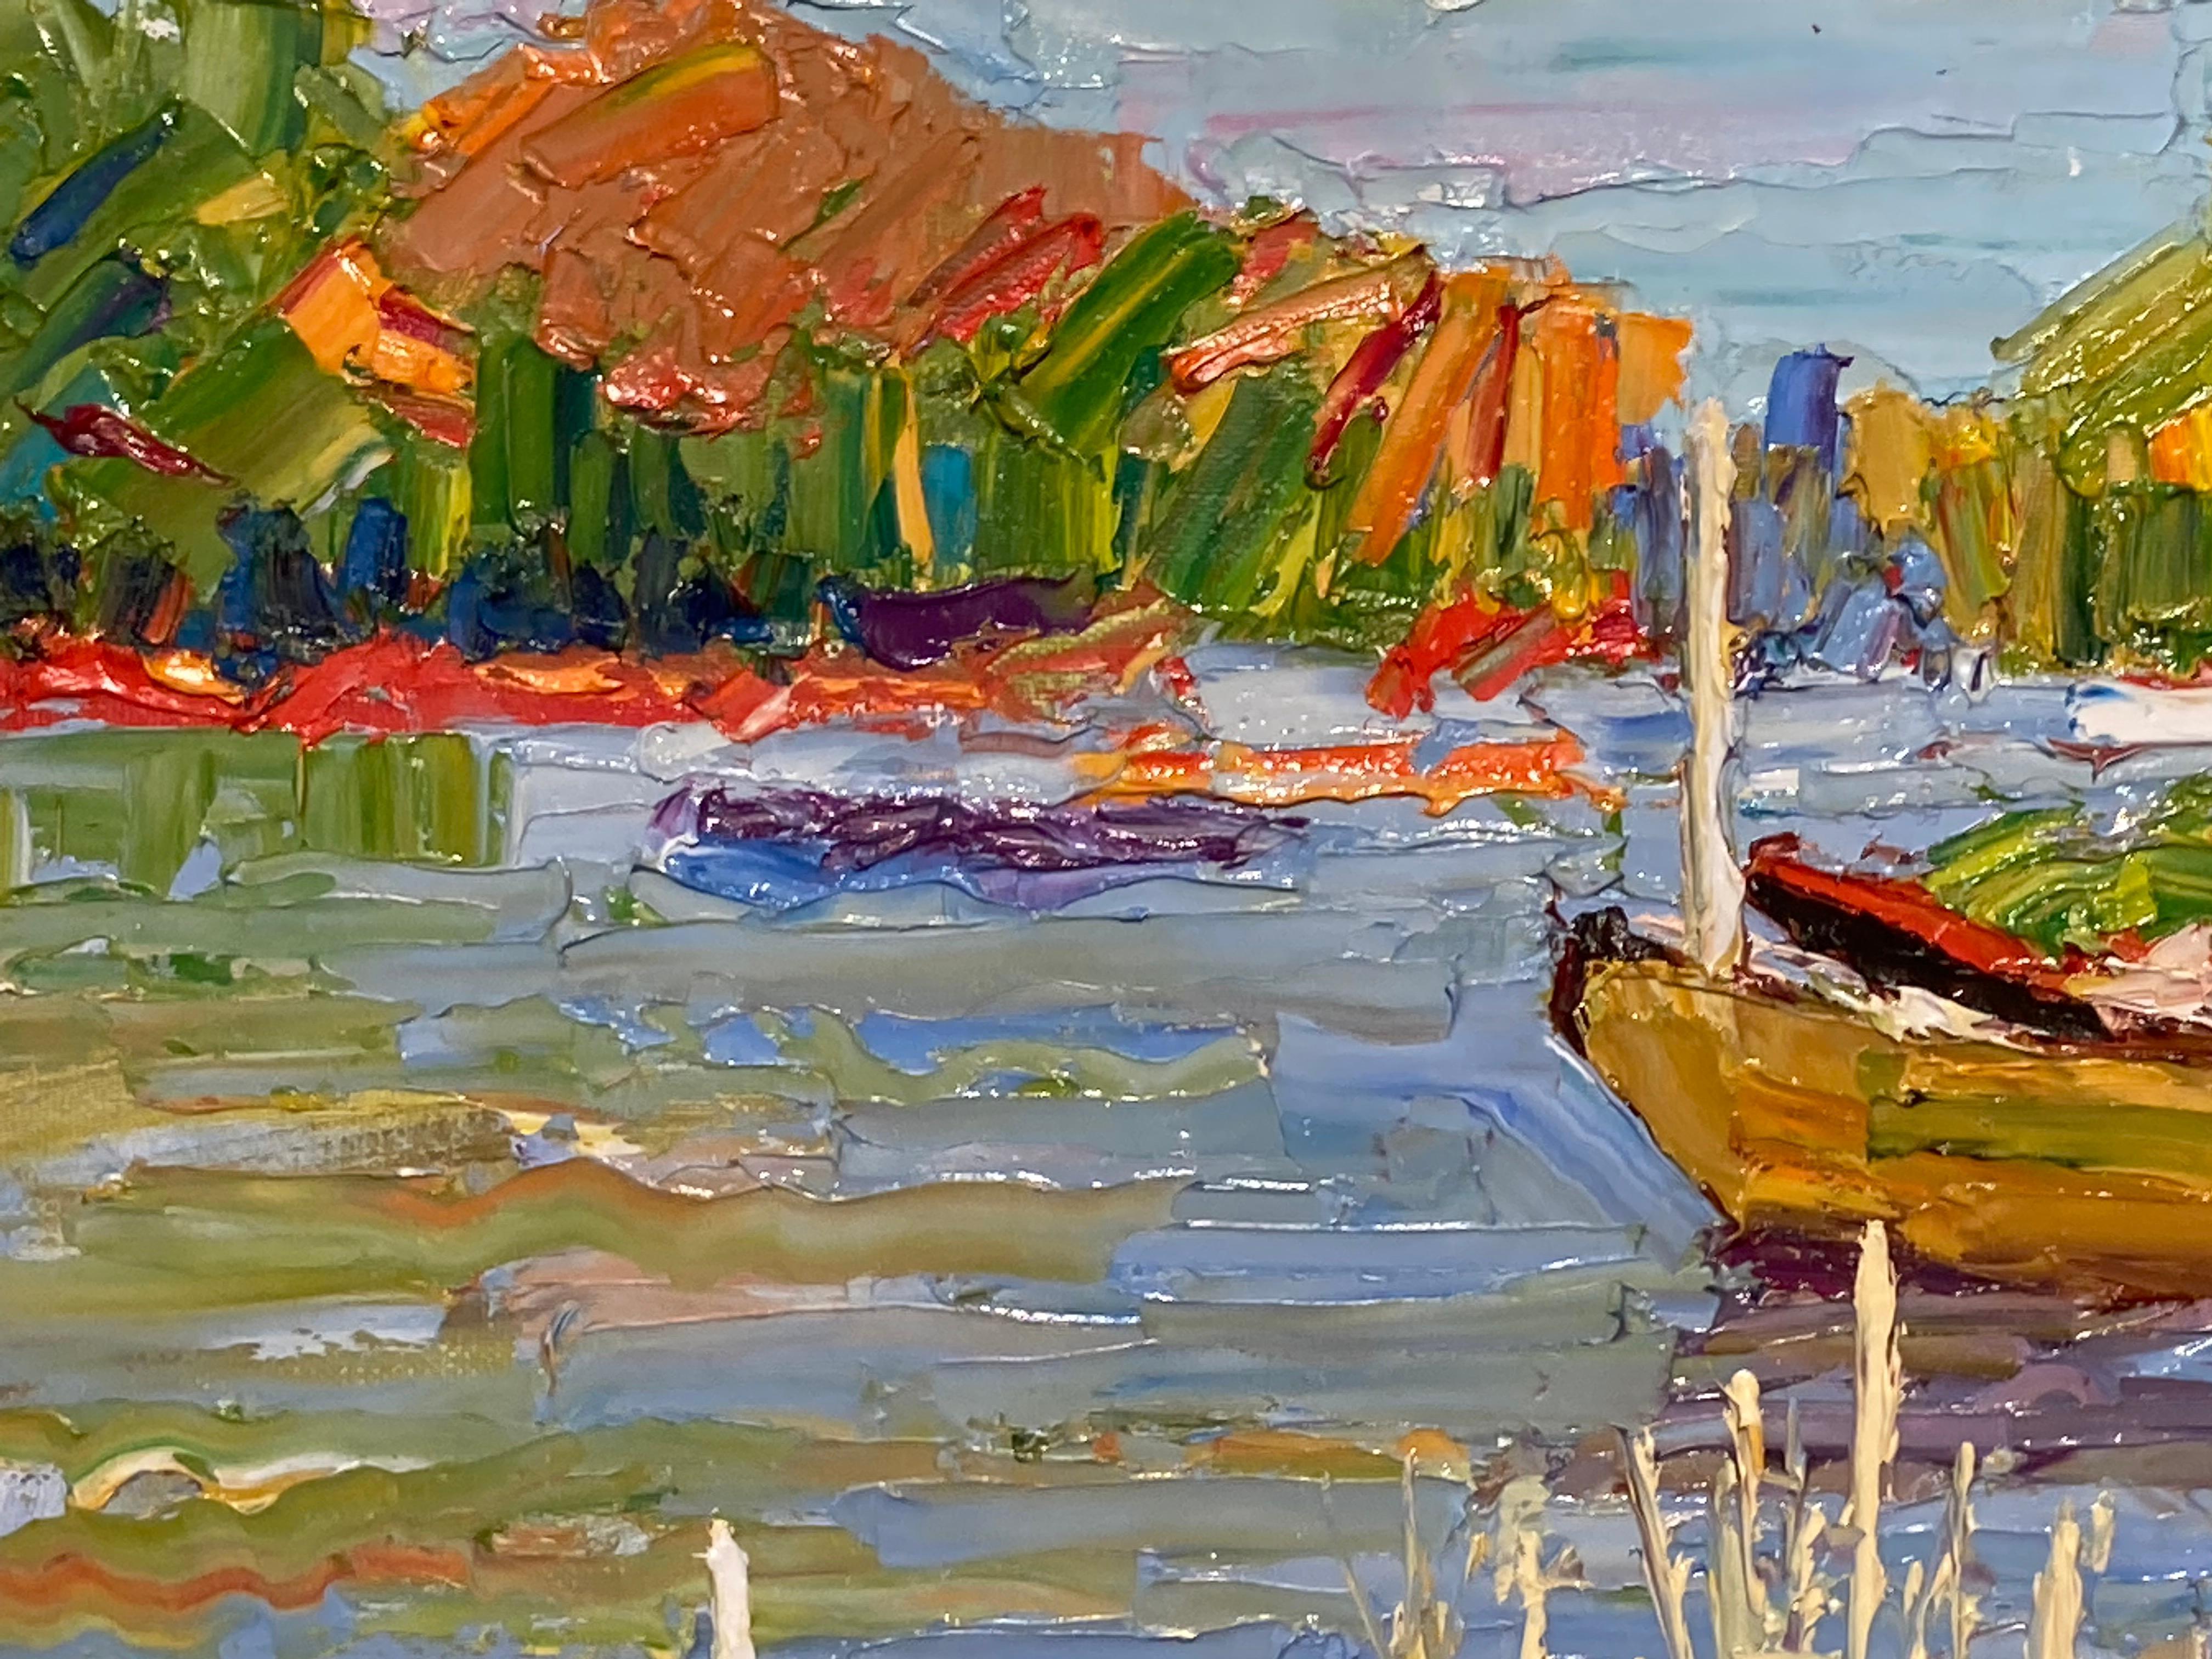 This oil on linen painting by James Cobb features several colorful row boats rested at the edge of a grassy cove. The water glistens with the light and colors on this picture perfect afternoon. The tall sandy colored grass and the subtle movements